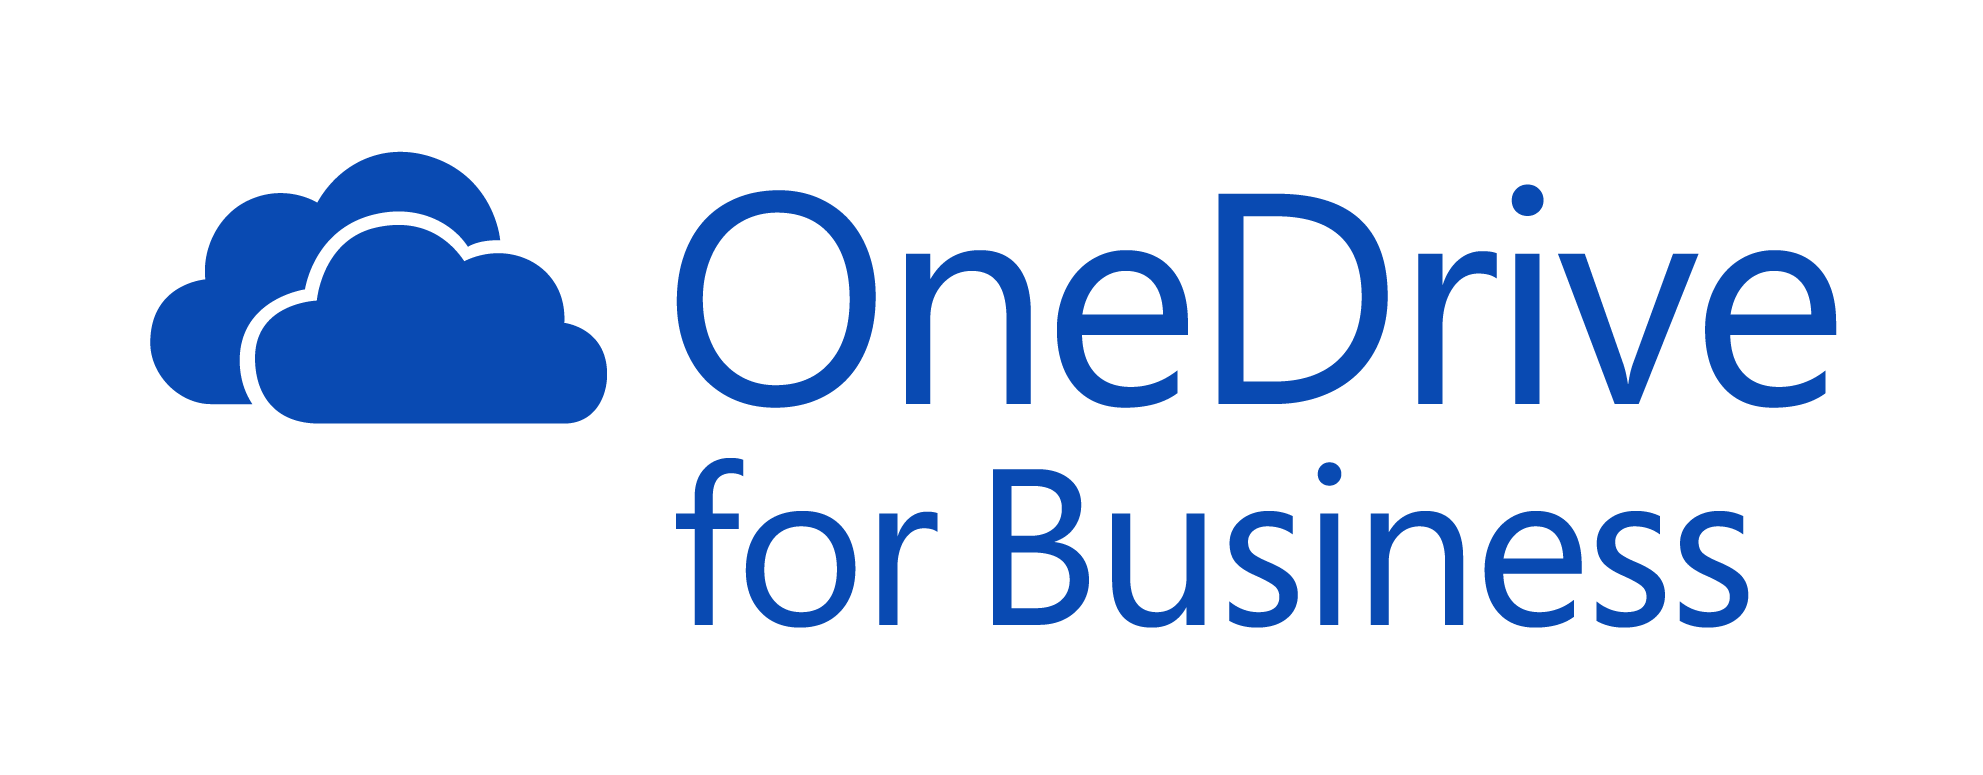 Microsoft SharePoint Logo - Choosing between OneDrive for Business and SharePoint